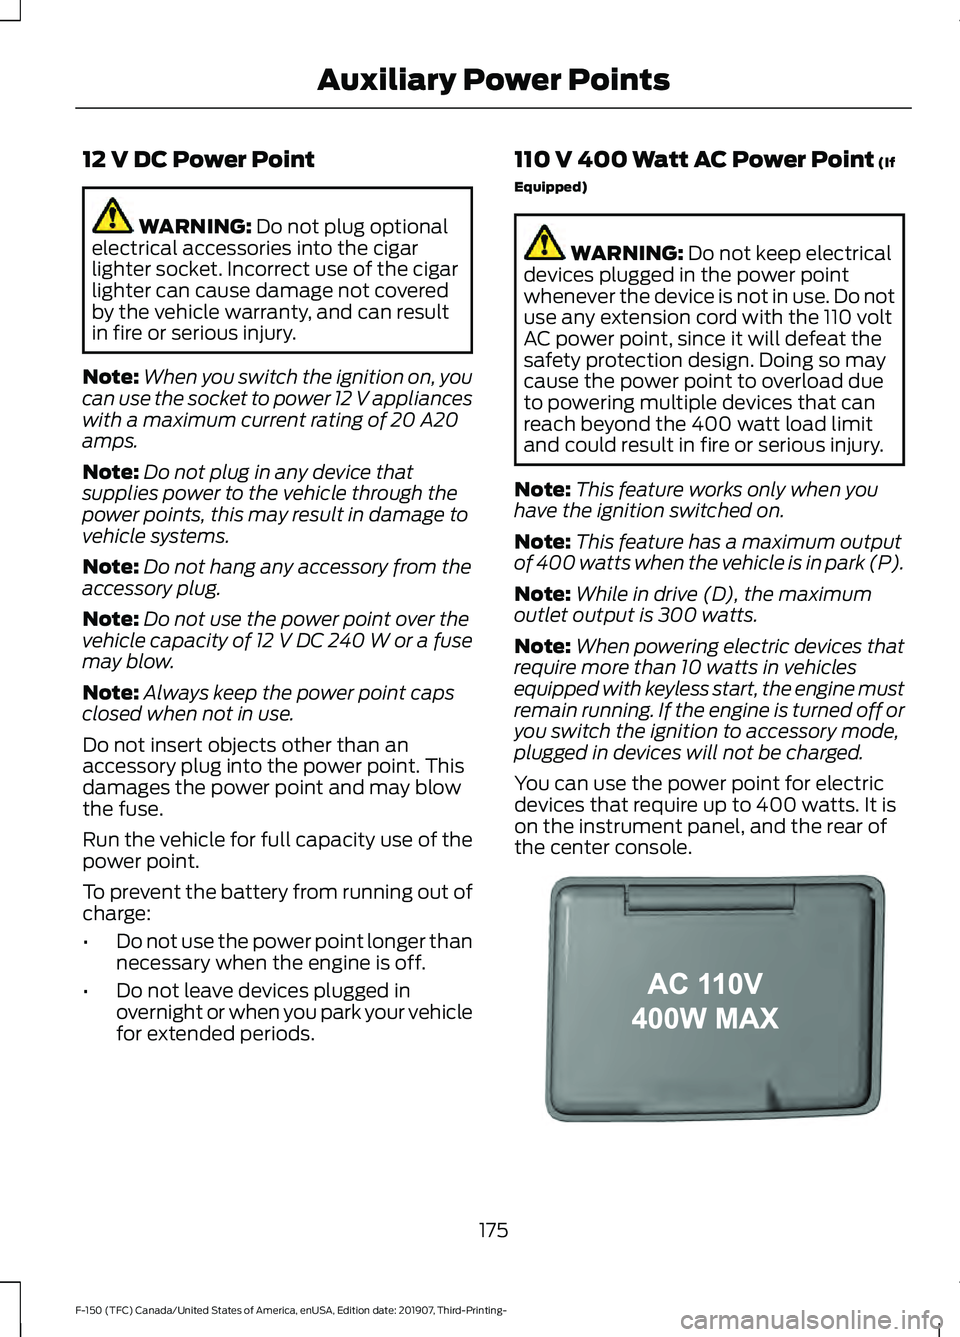 FORD F-150 2020  Owners Manual 12 V DC Power Point
WARNING: Do not plug optional
electrical accessories into the cigar
lighter socket. Incorrect use of the cigar
lighter can cause damage not covered
by the vehicle warranty, and can